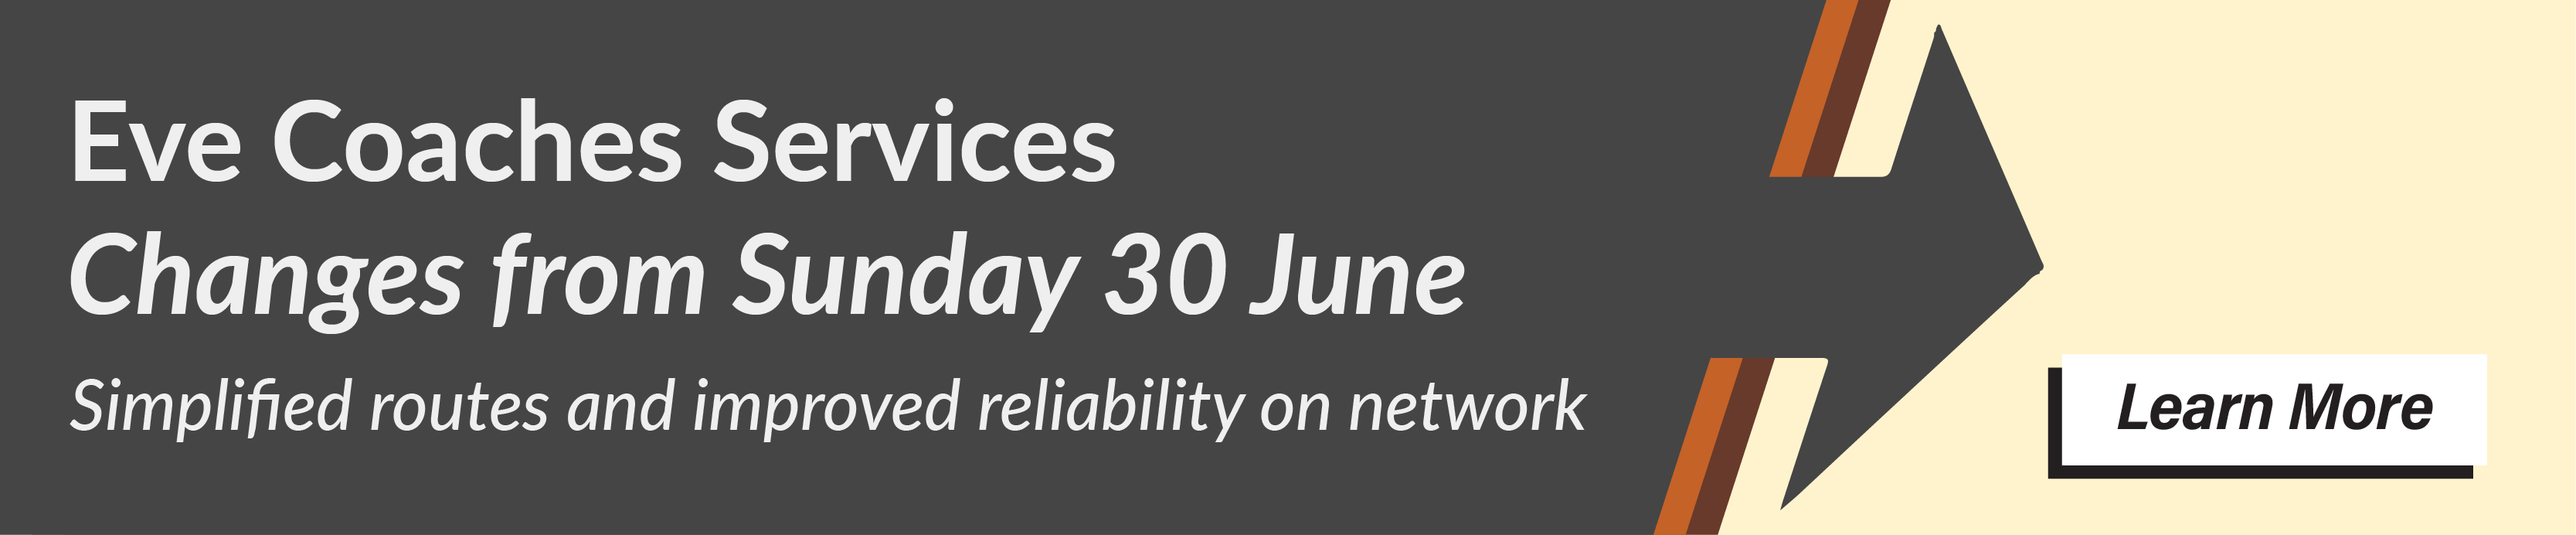 Eve Coaches Service Changes from Sunday 30 June. Simplified routes and improved reliability on network. Learn more.